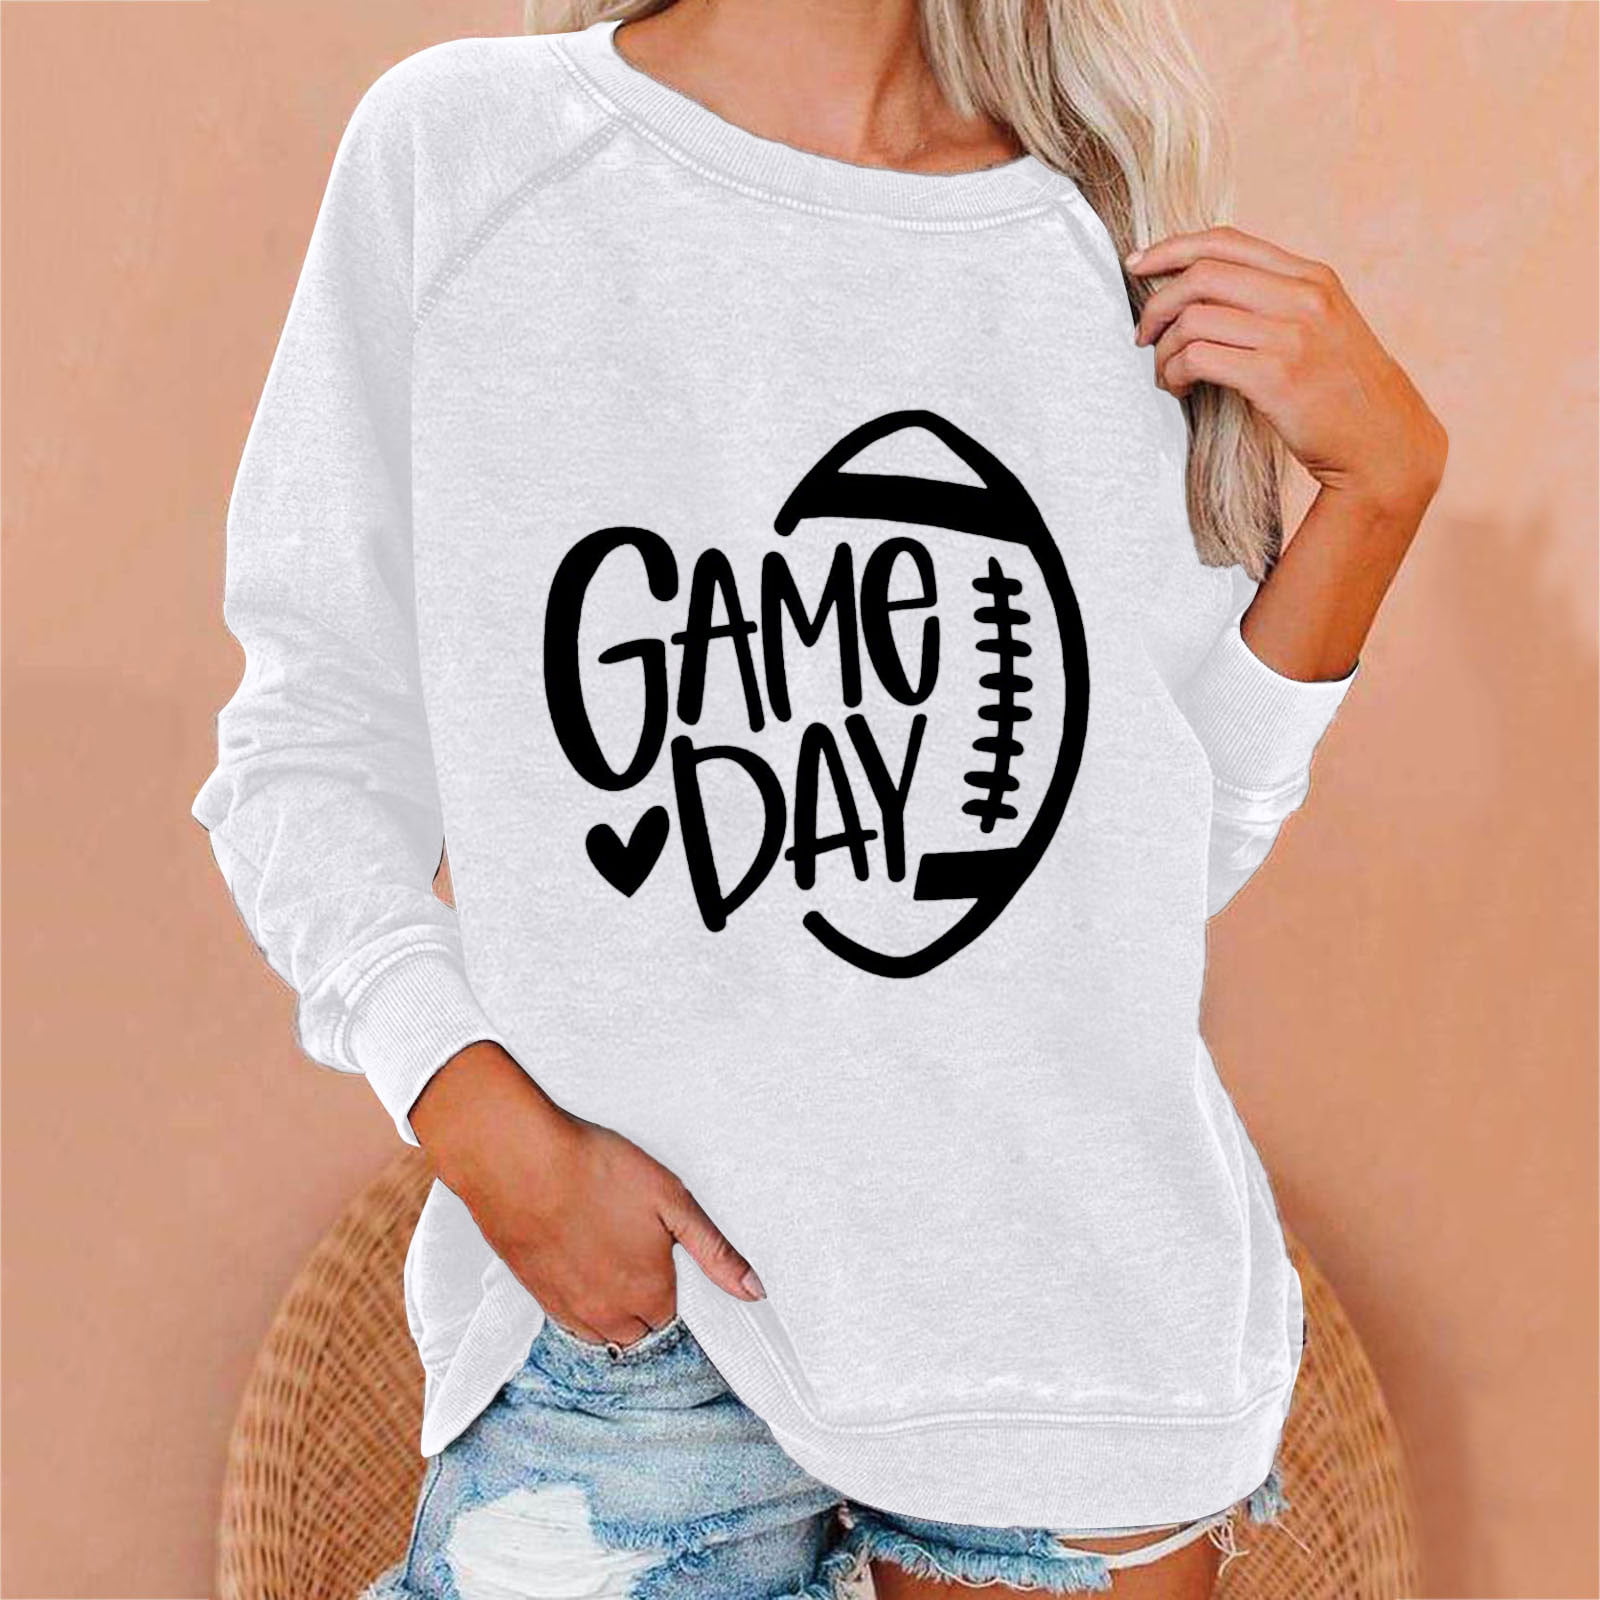 ZQGJB Baseball Game Day Sweatshirts for Women Plus Size Long Sleeve Graphic  T Shirts Loose Trendy Pullover Tops White L 